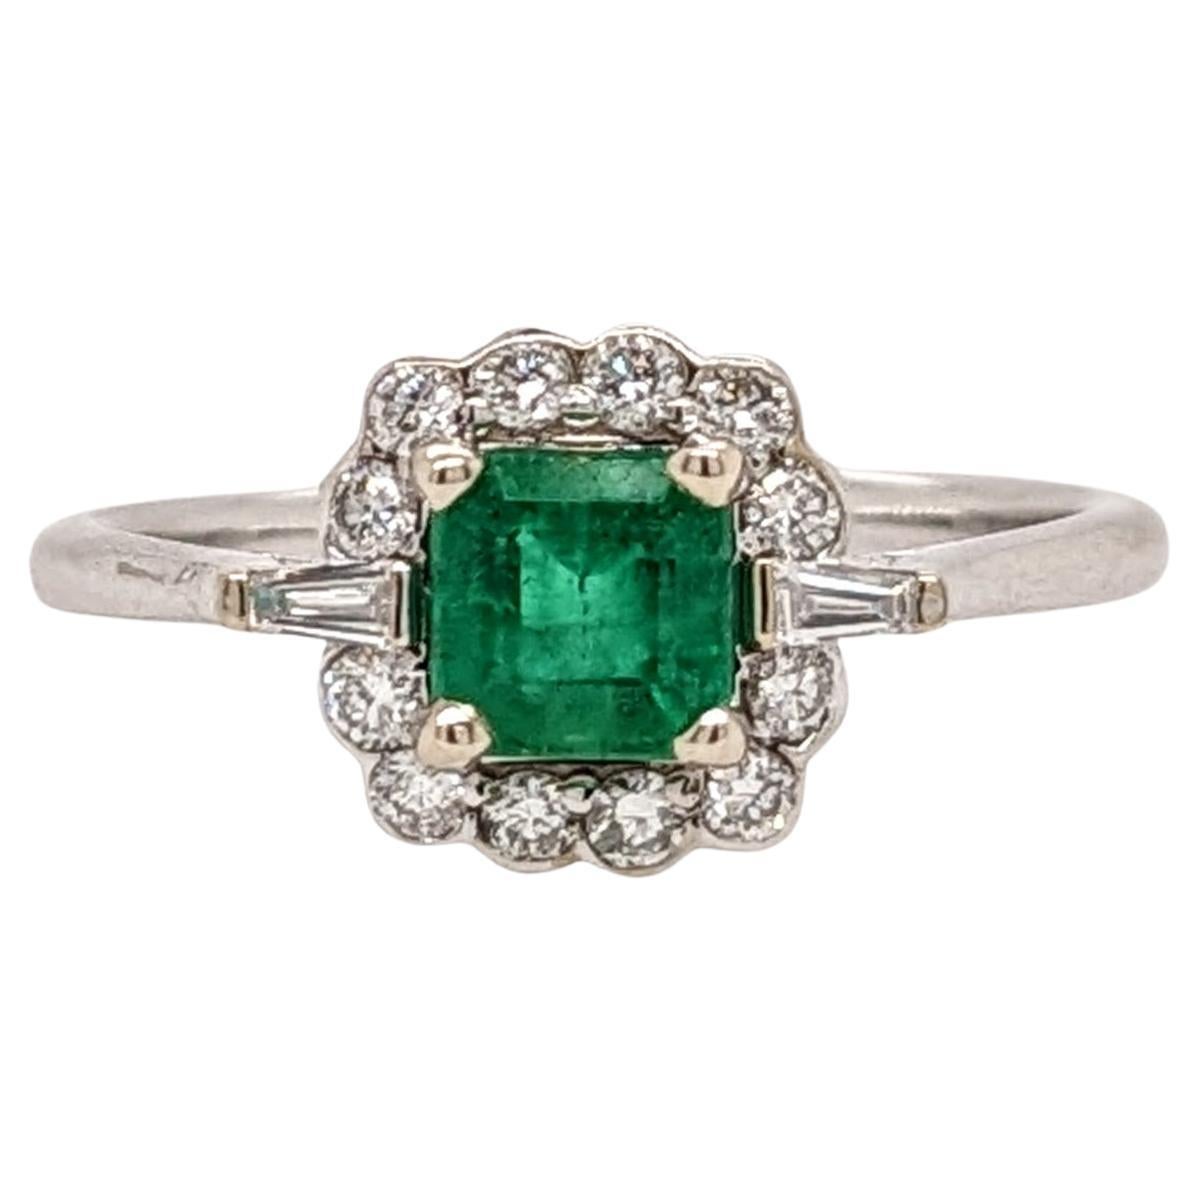 Emerald w Diamond Halo & Tapered Baguette Accents in 14K Gold Emerald Cut 5mm